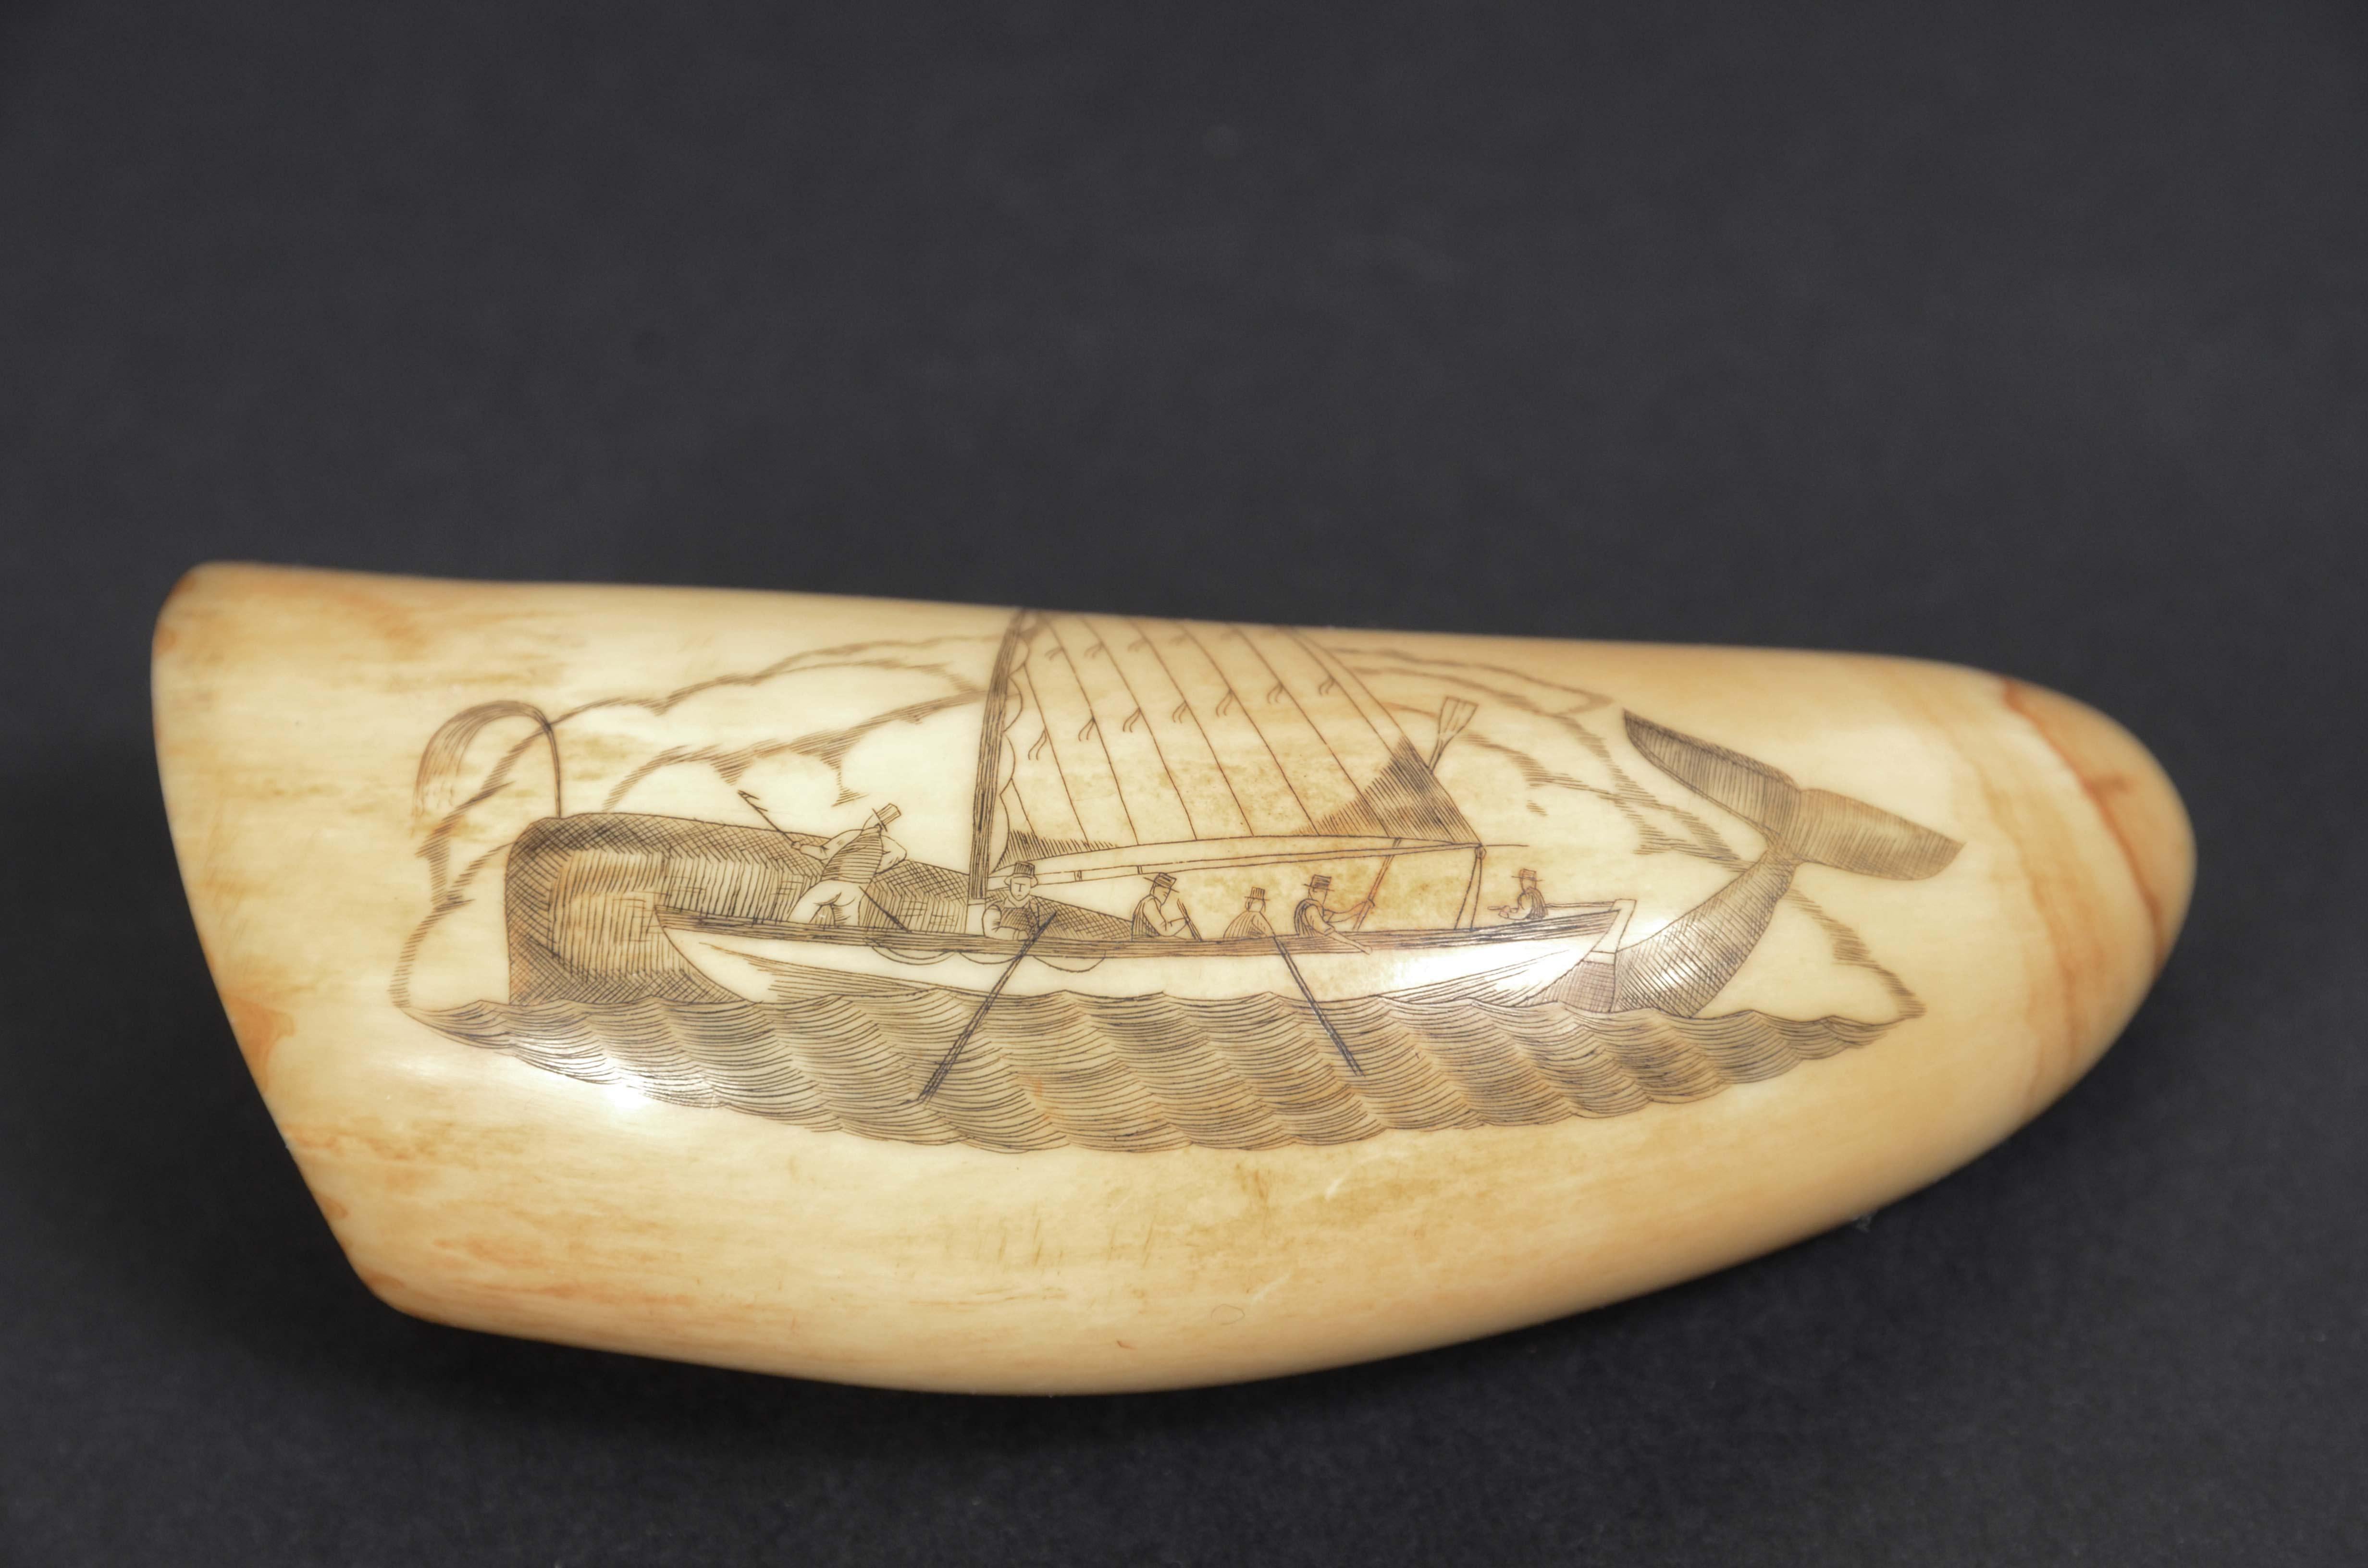 Scrimshaw of an engraved whale tooth, of fine workmanship datable to around the  mid-19th century, length 10.8 cm, depicting small rowing boat  with  sail and 6 men on board, one of them in the act  of harpooning a whale larger than the boat. On the